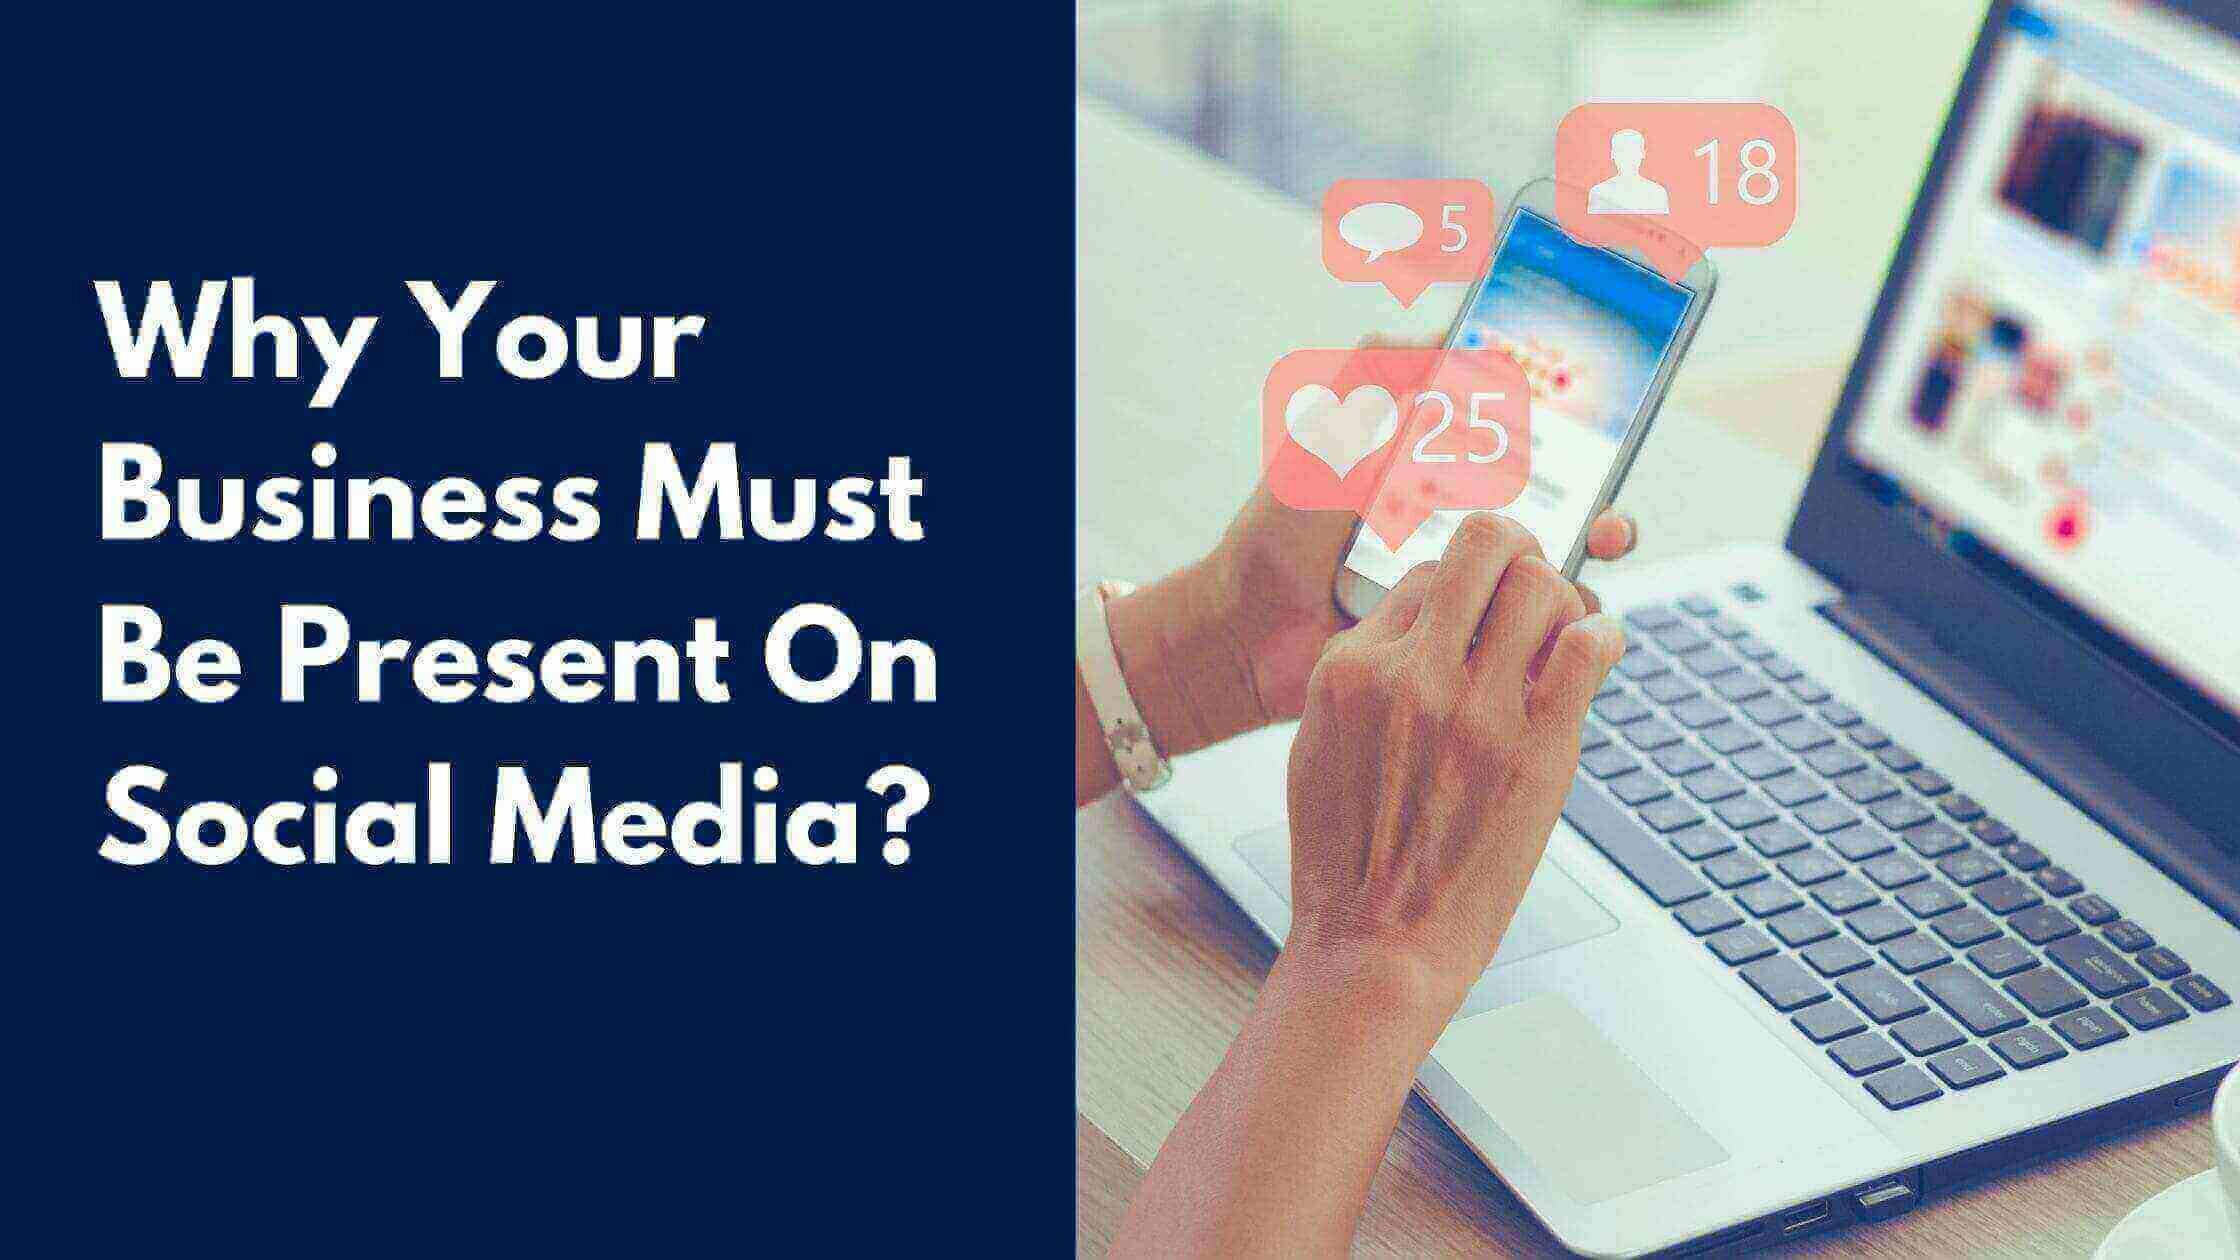 Why Your Business Must Be Present On Social Media